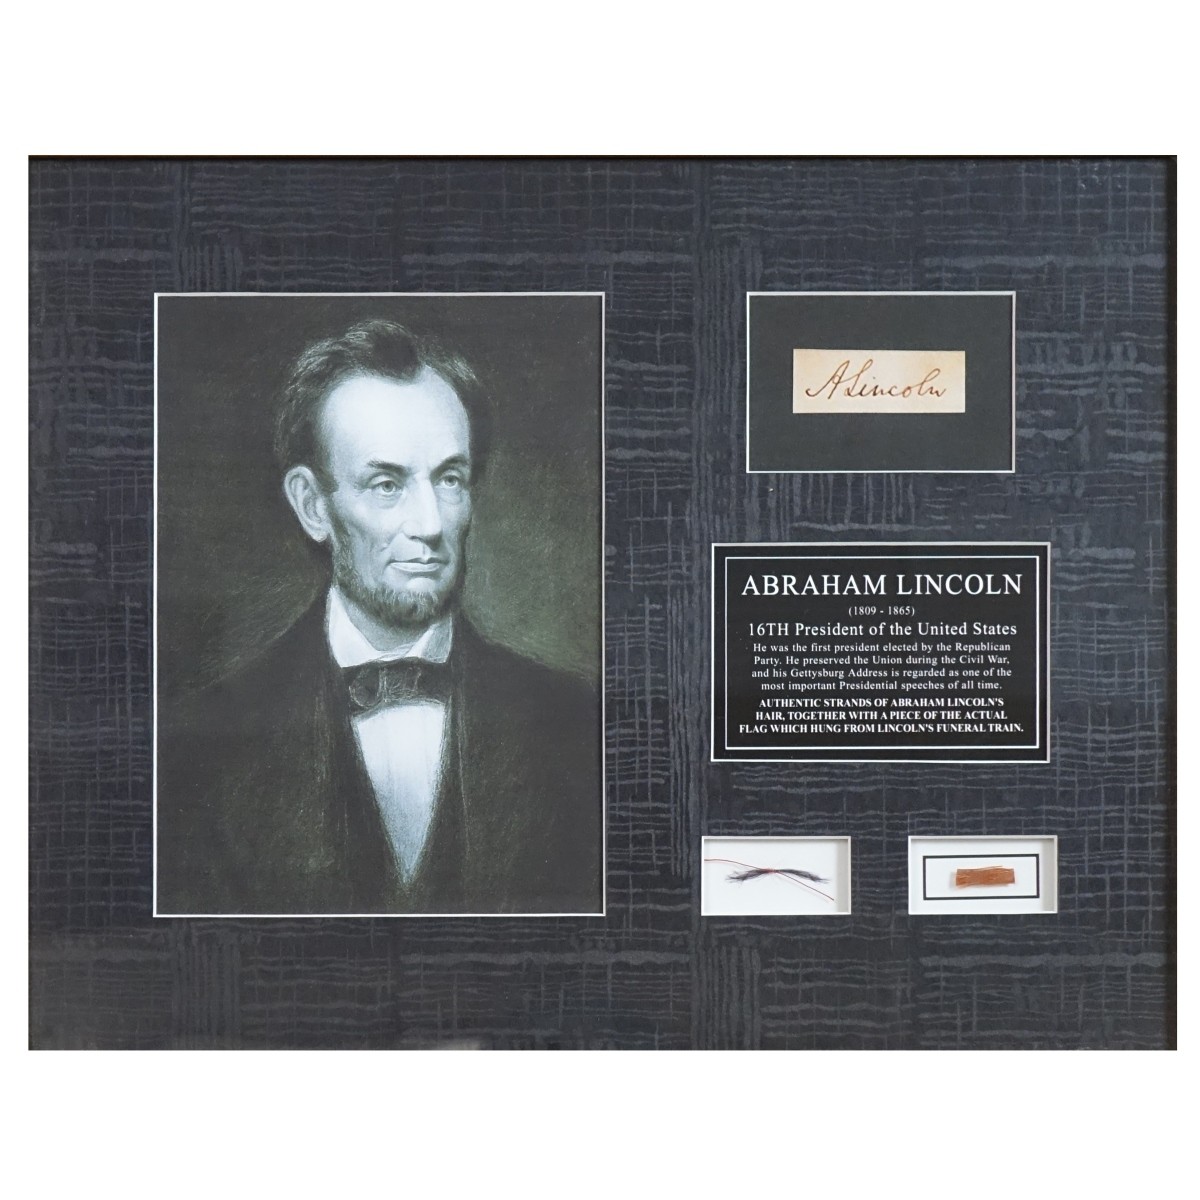 Abraham Lincoln (1809-1865) Artifacts